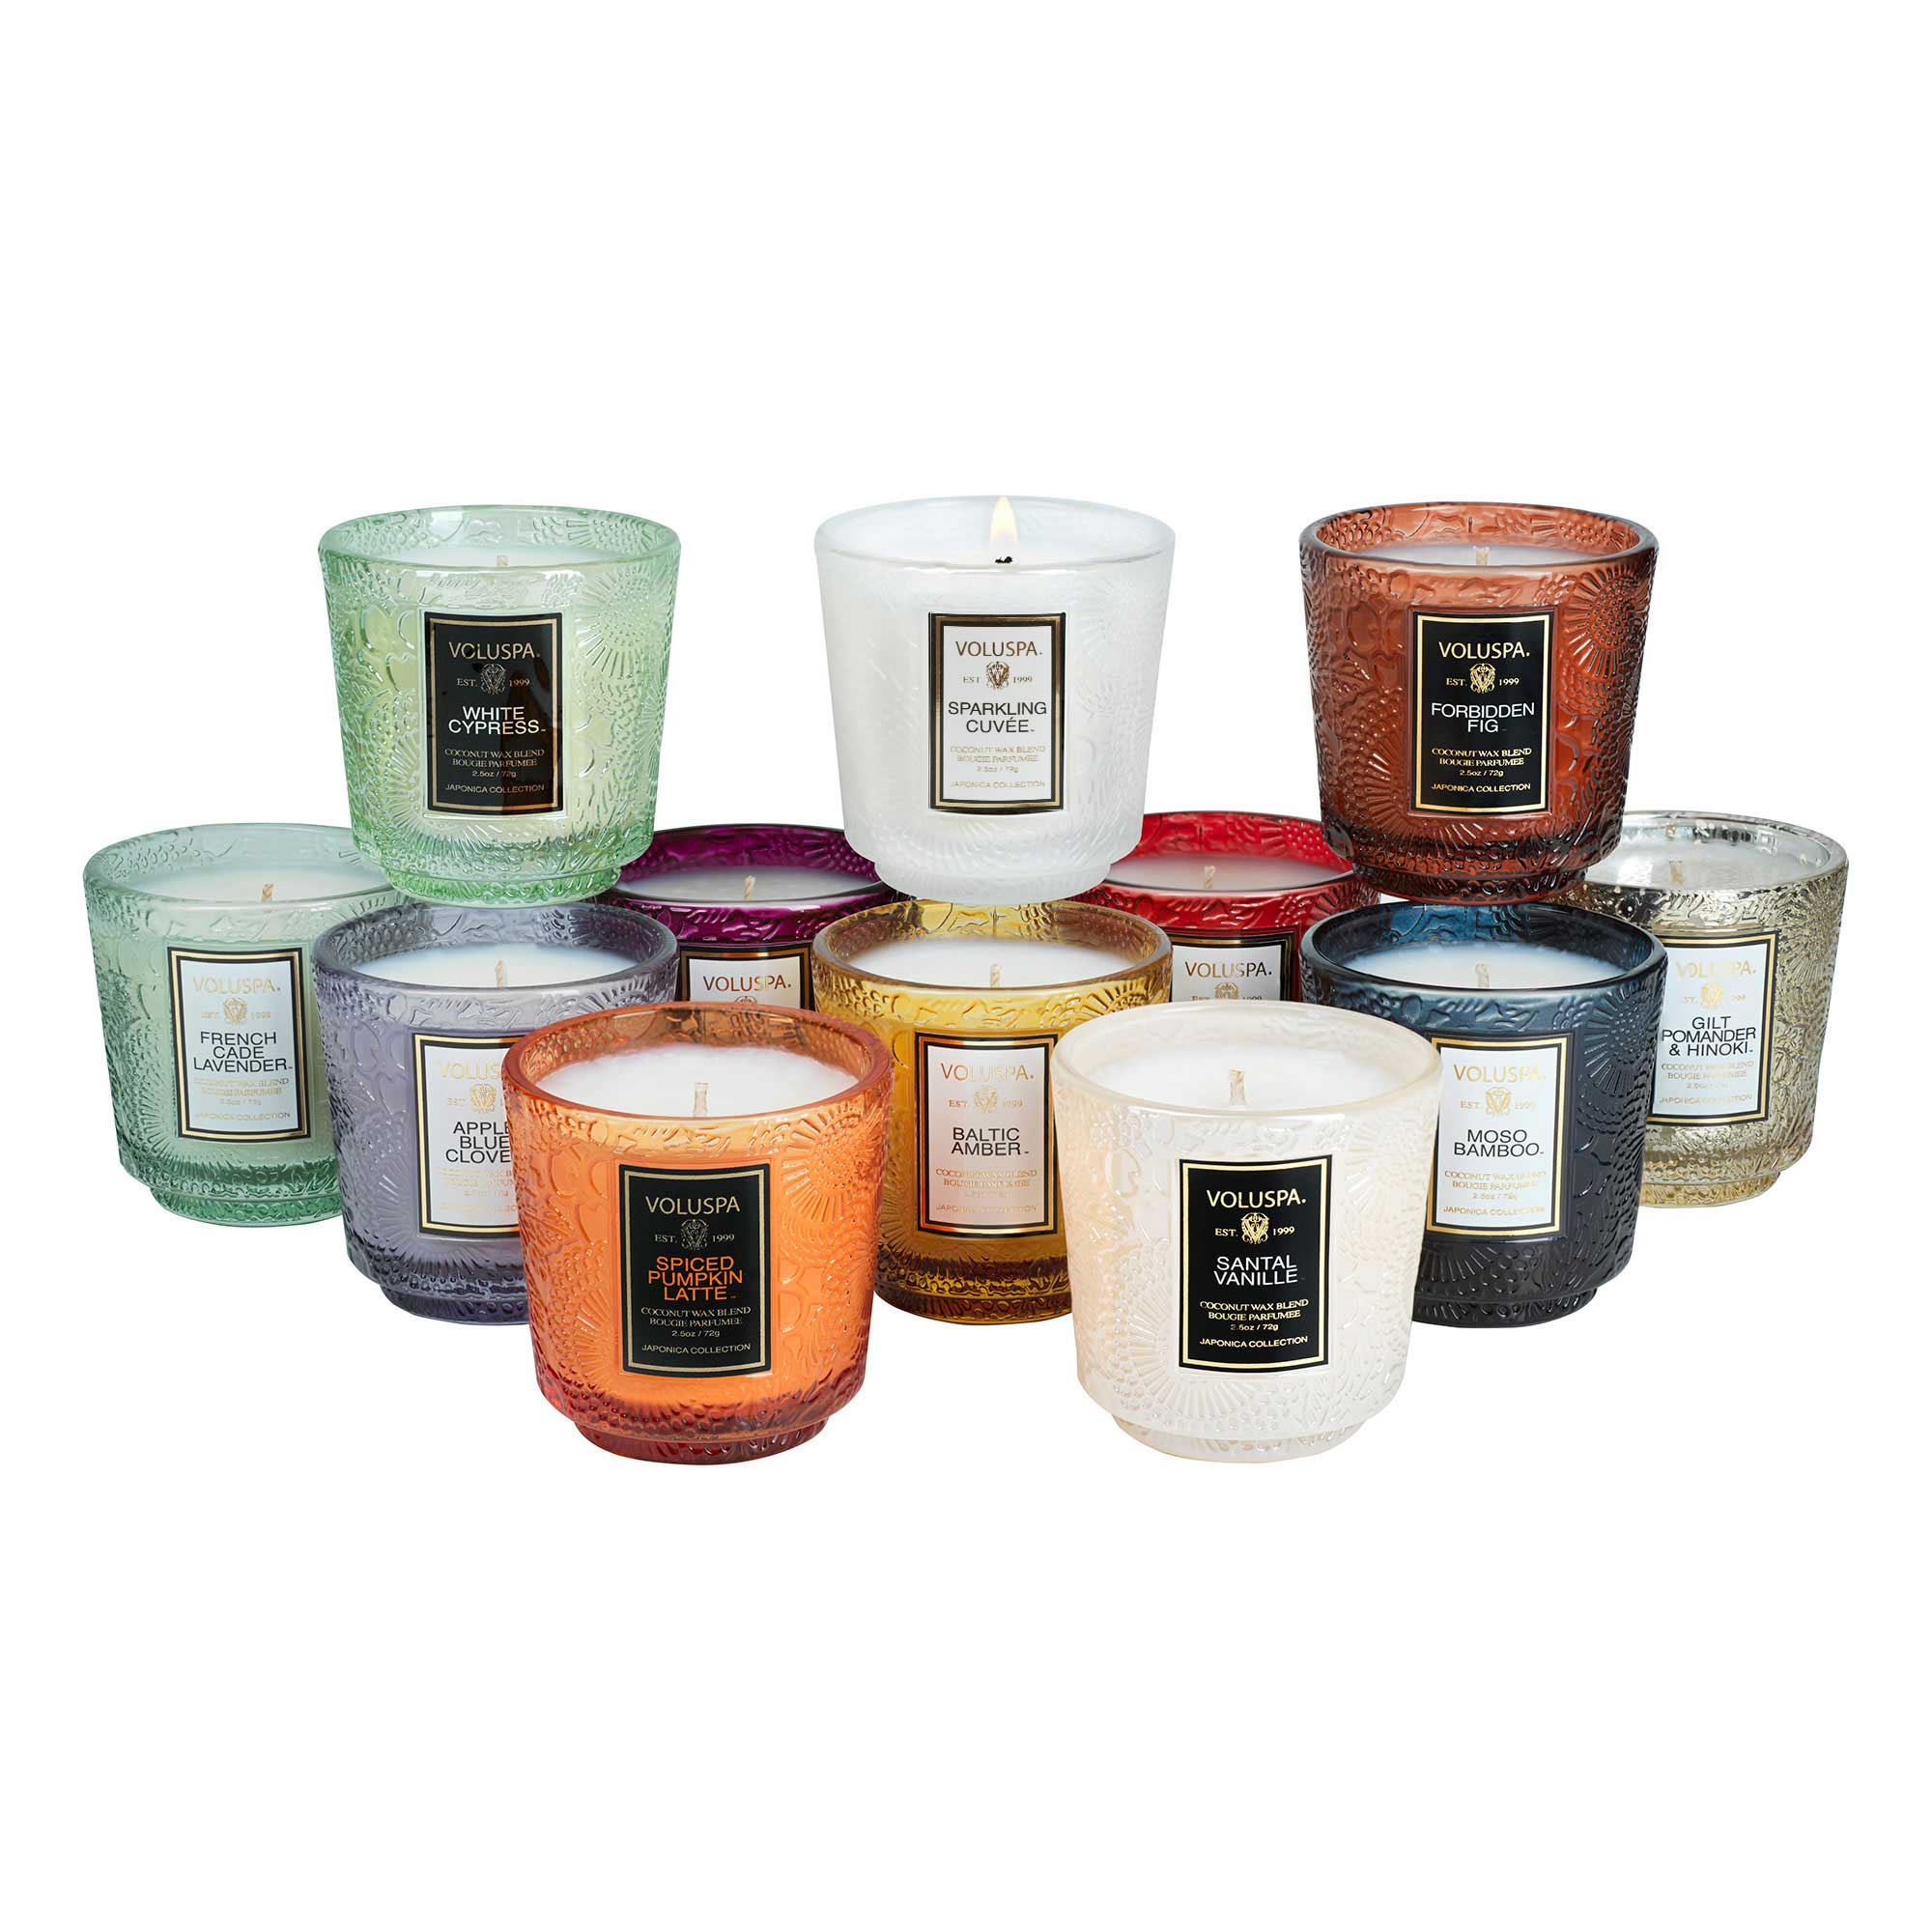 Voluspa Japonica 12 Day Advent Calendar Candle Gift Set